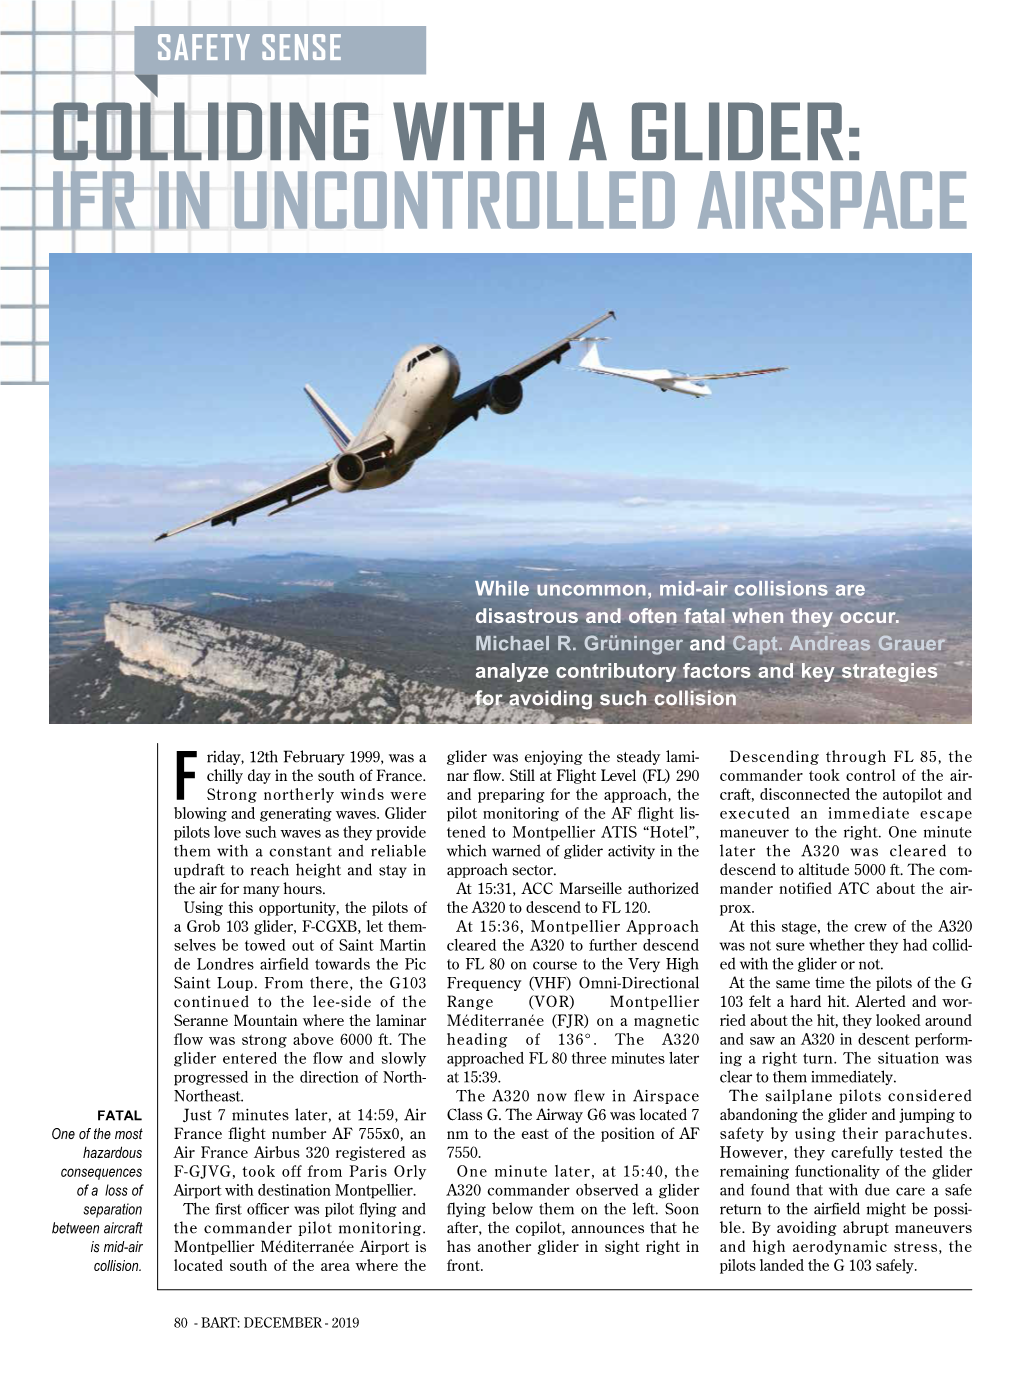 Colliding with a Glider: Ifr in Uncontrolled Airspace